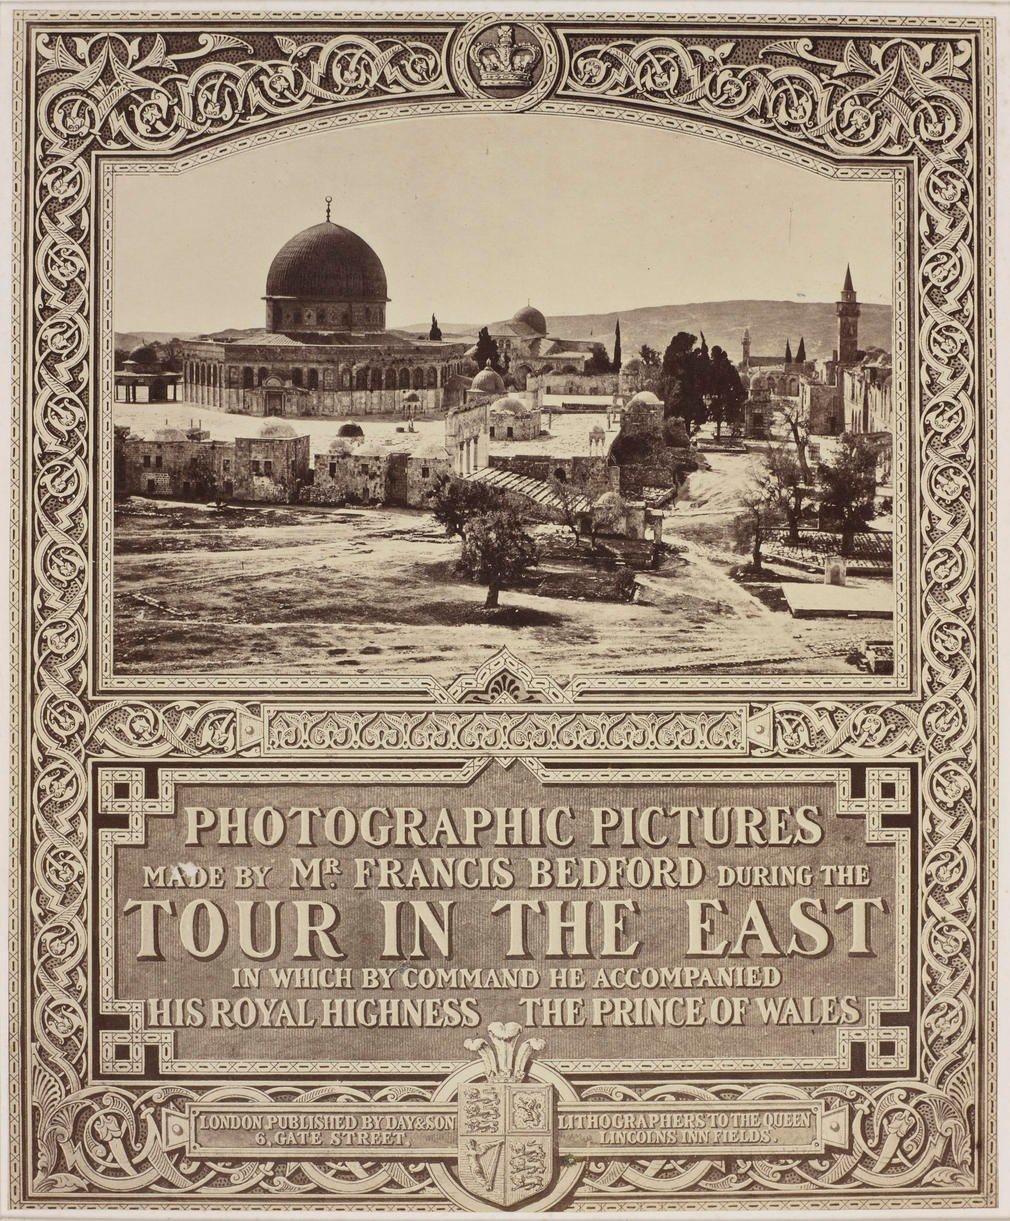 Photographic title page from Francis Bedford's Middle East views of 1862. Includes a copy of Bedford's view of the 'Mosque of Omar from the Governor's House' in Jerusalem (see RCIN 2700932).